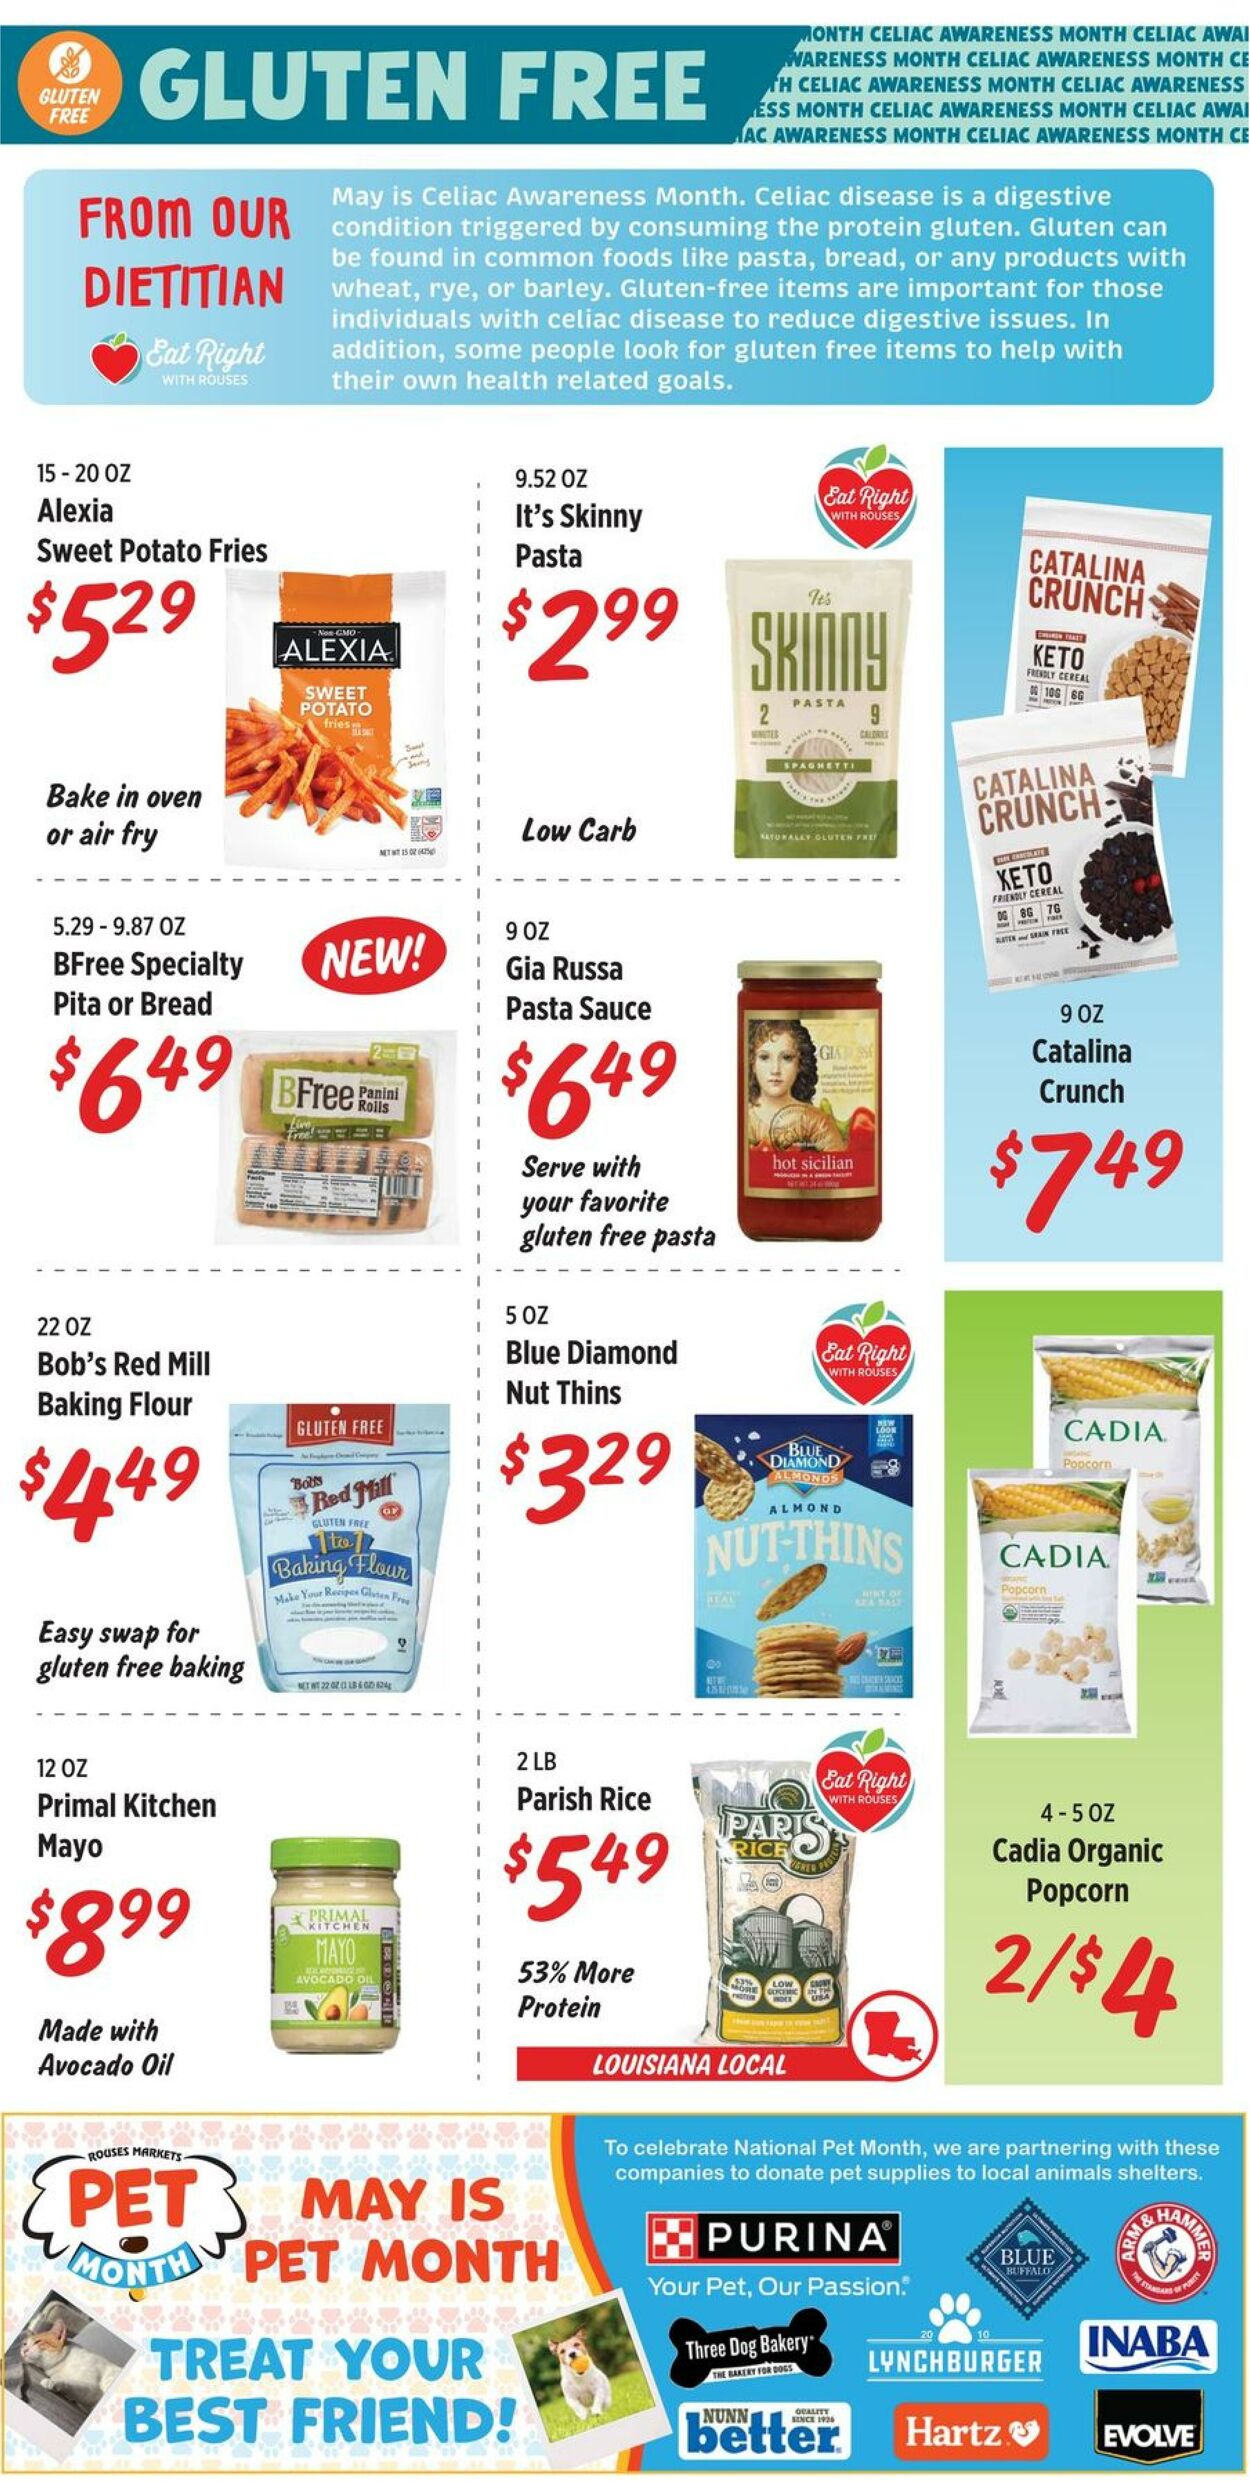 Weekly ad Rouses 04/26/2023 - 05/31/2023